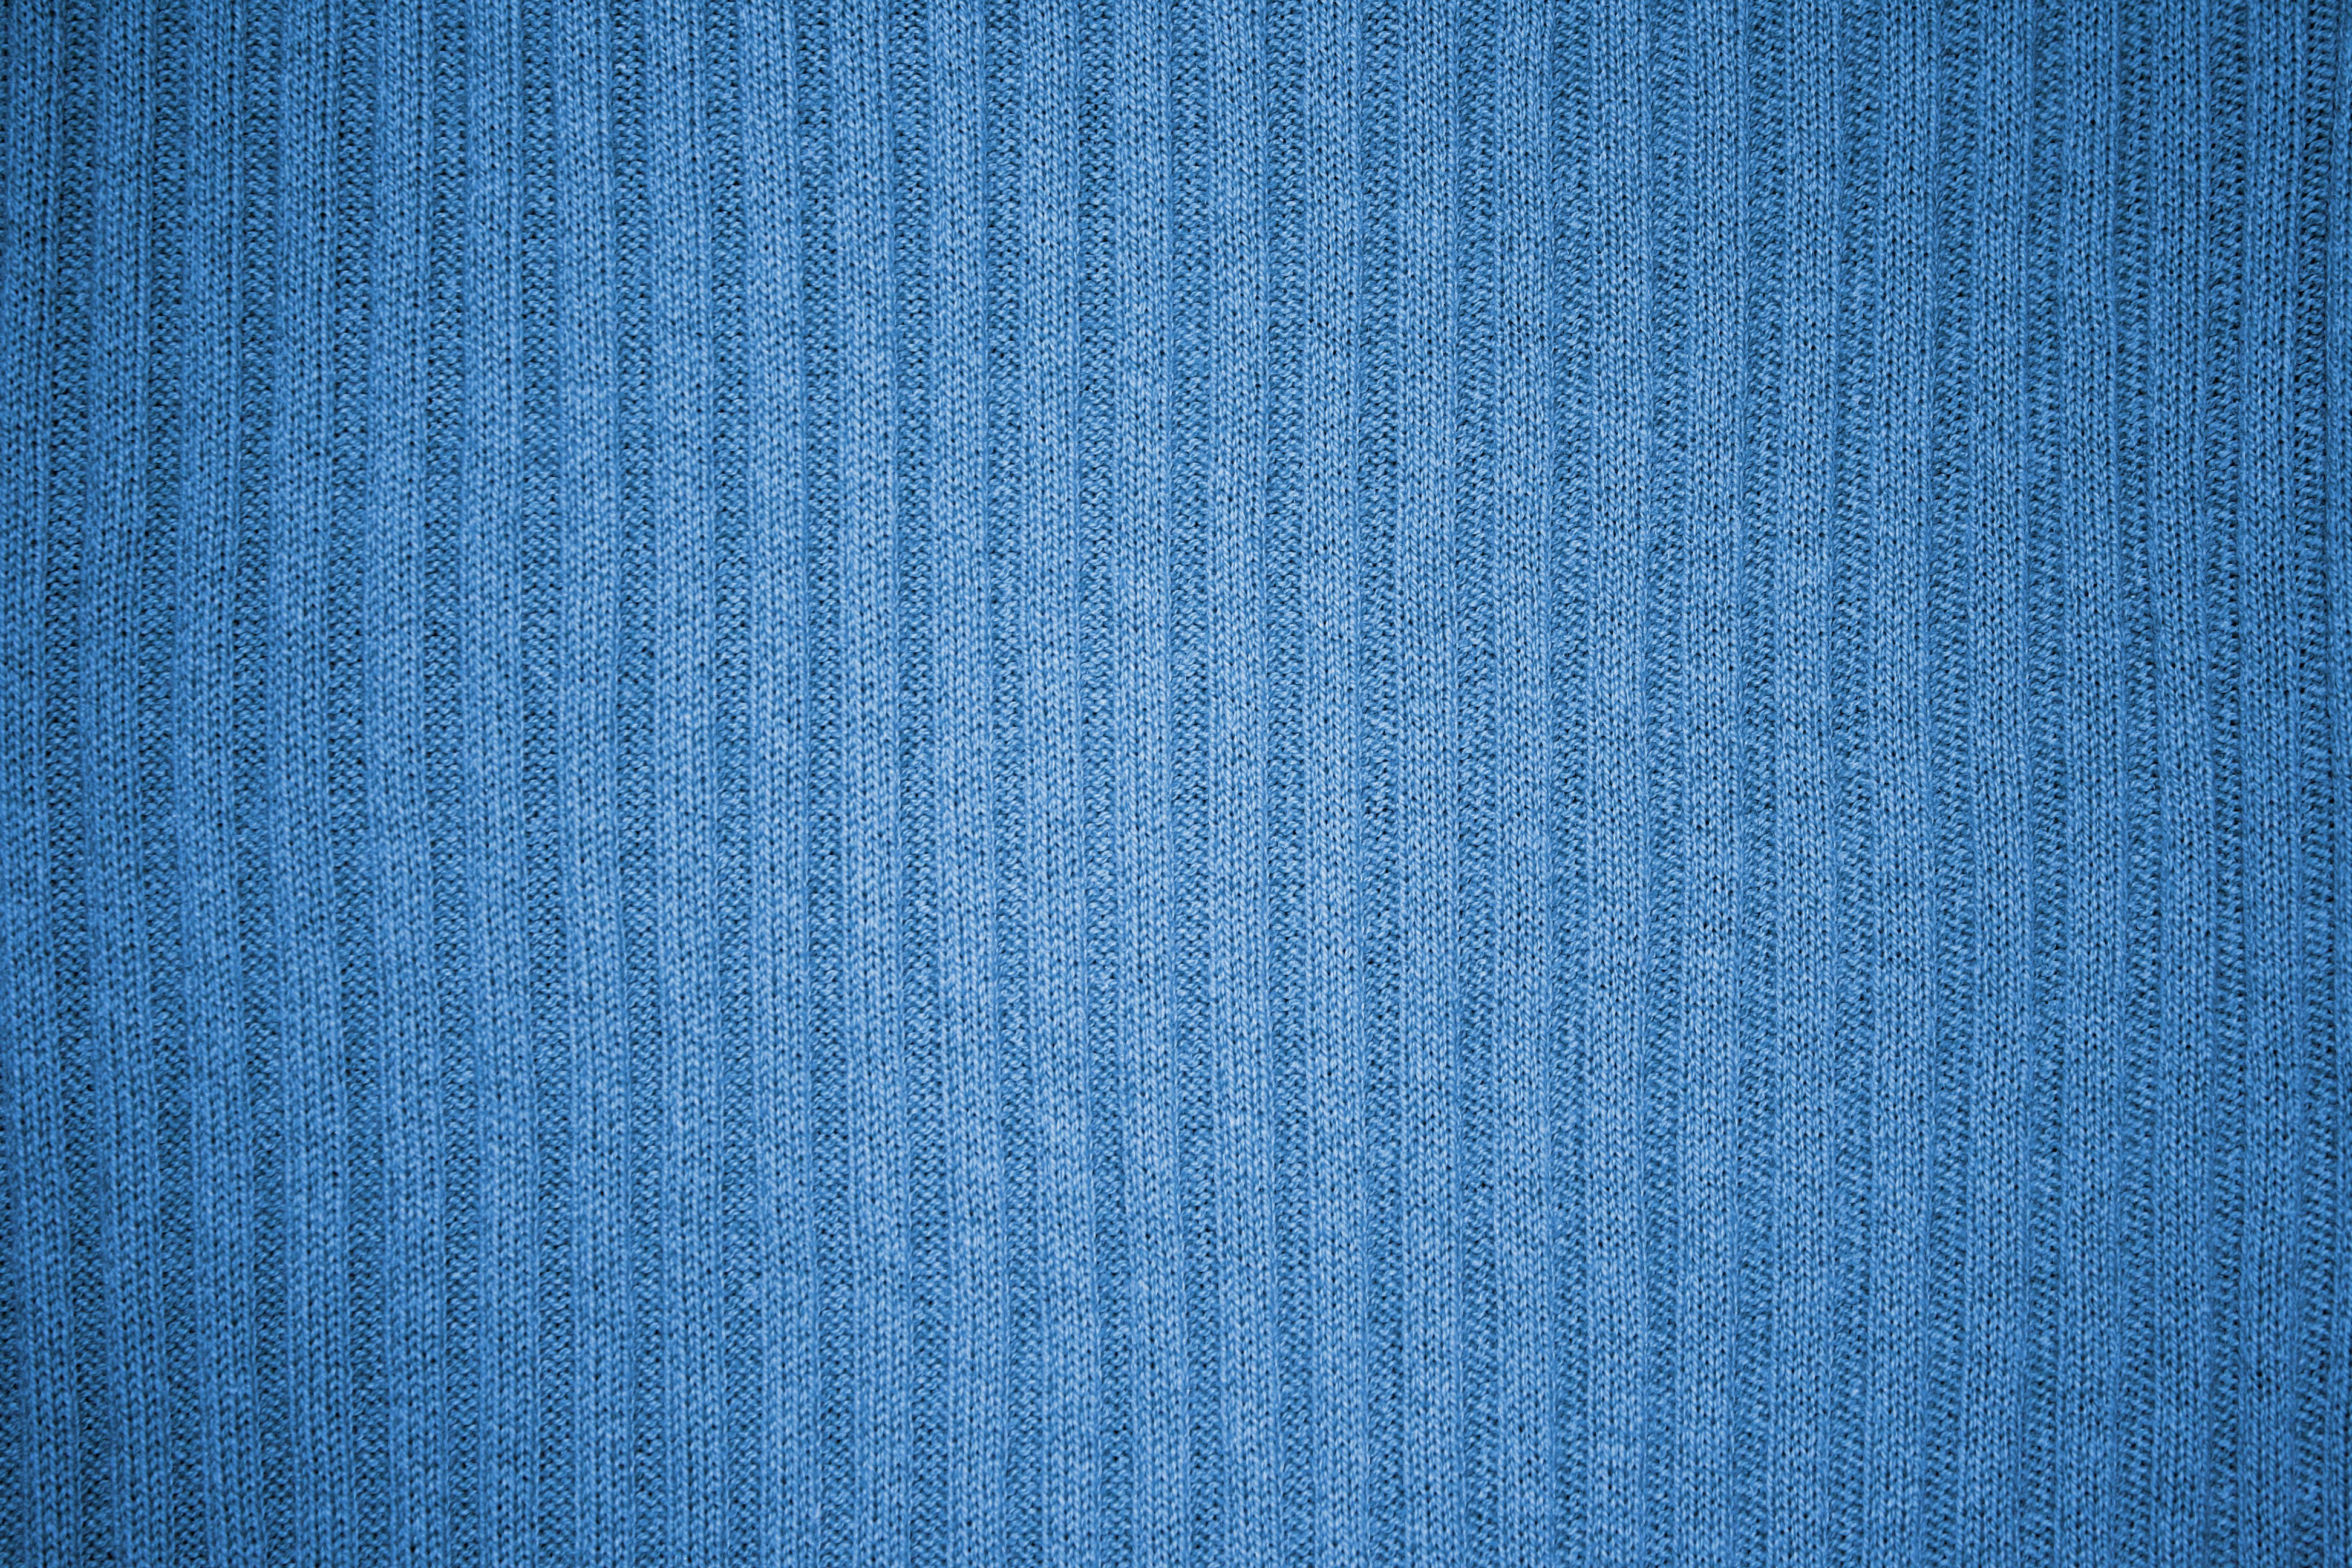 Light Blue Ribbed Knit Fabric Texture Picture | Free Photograph